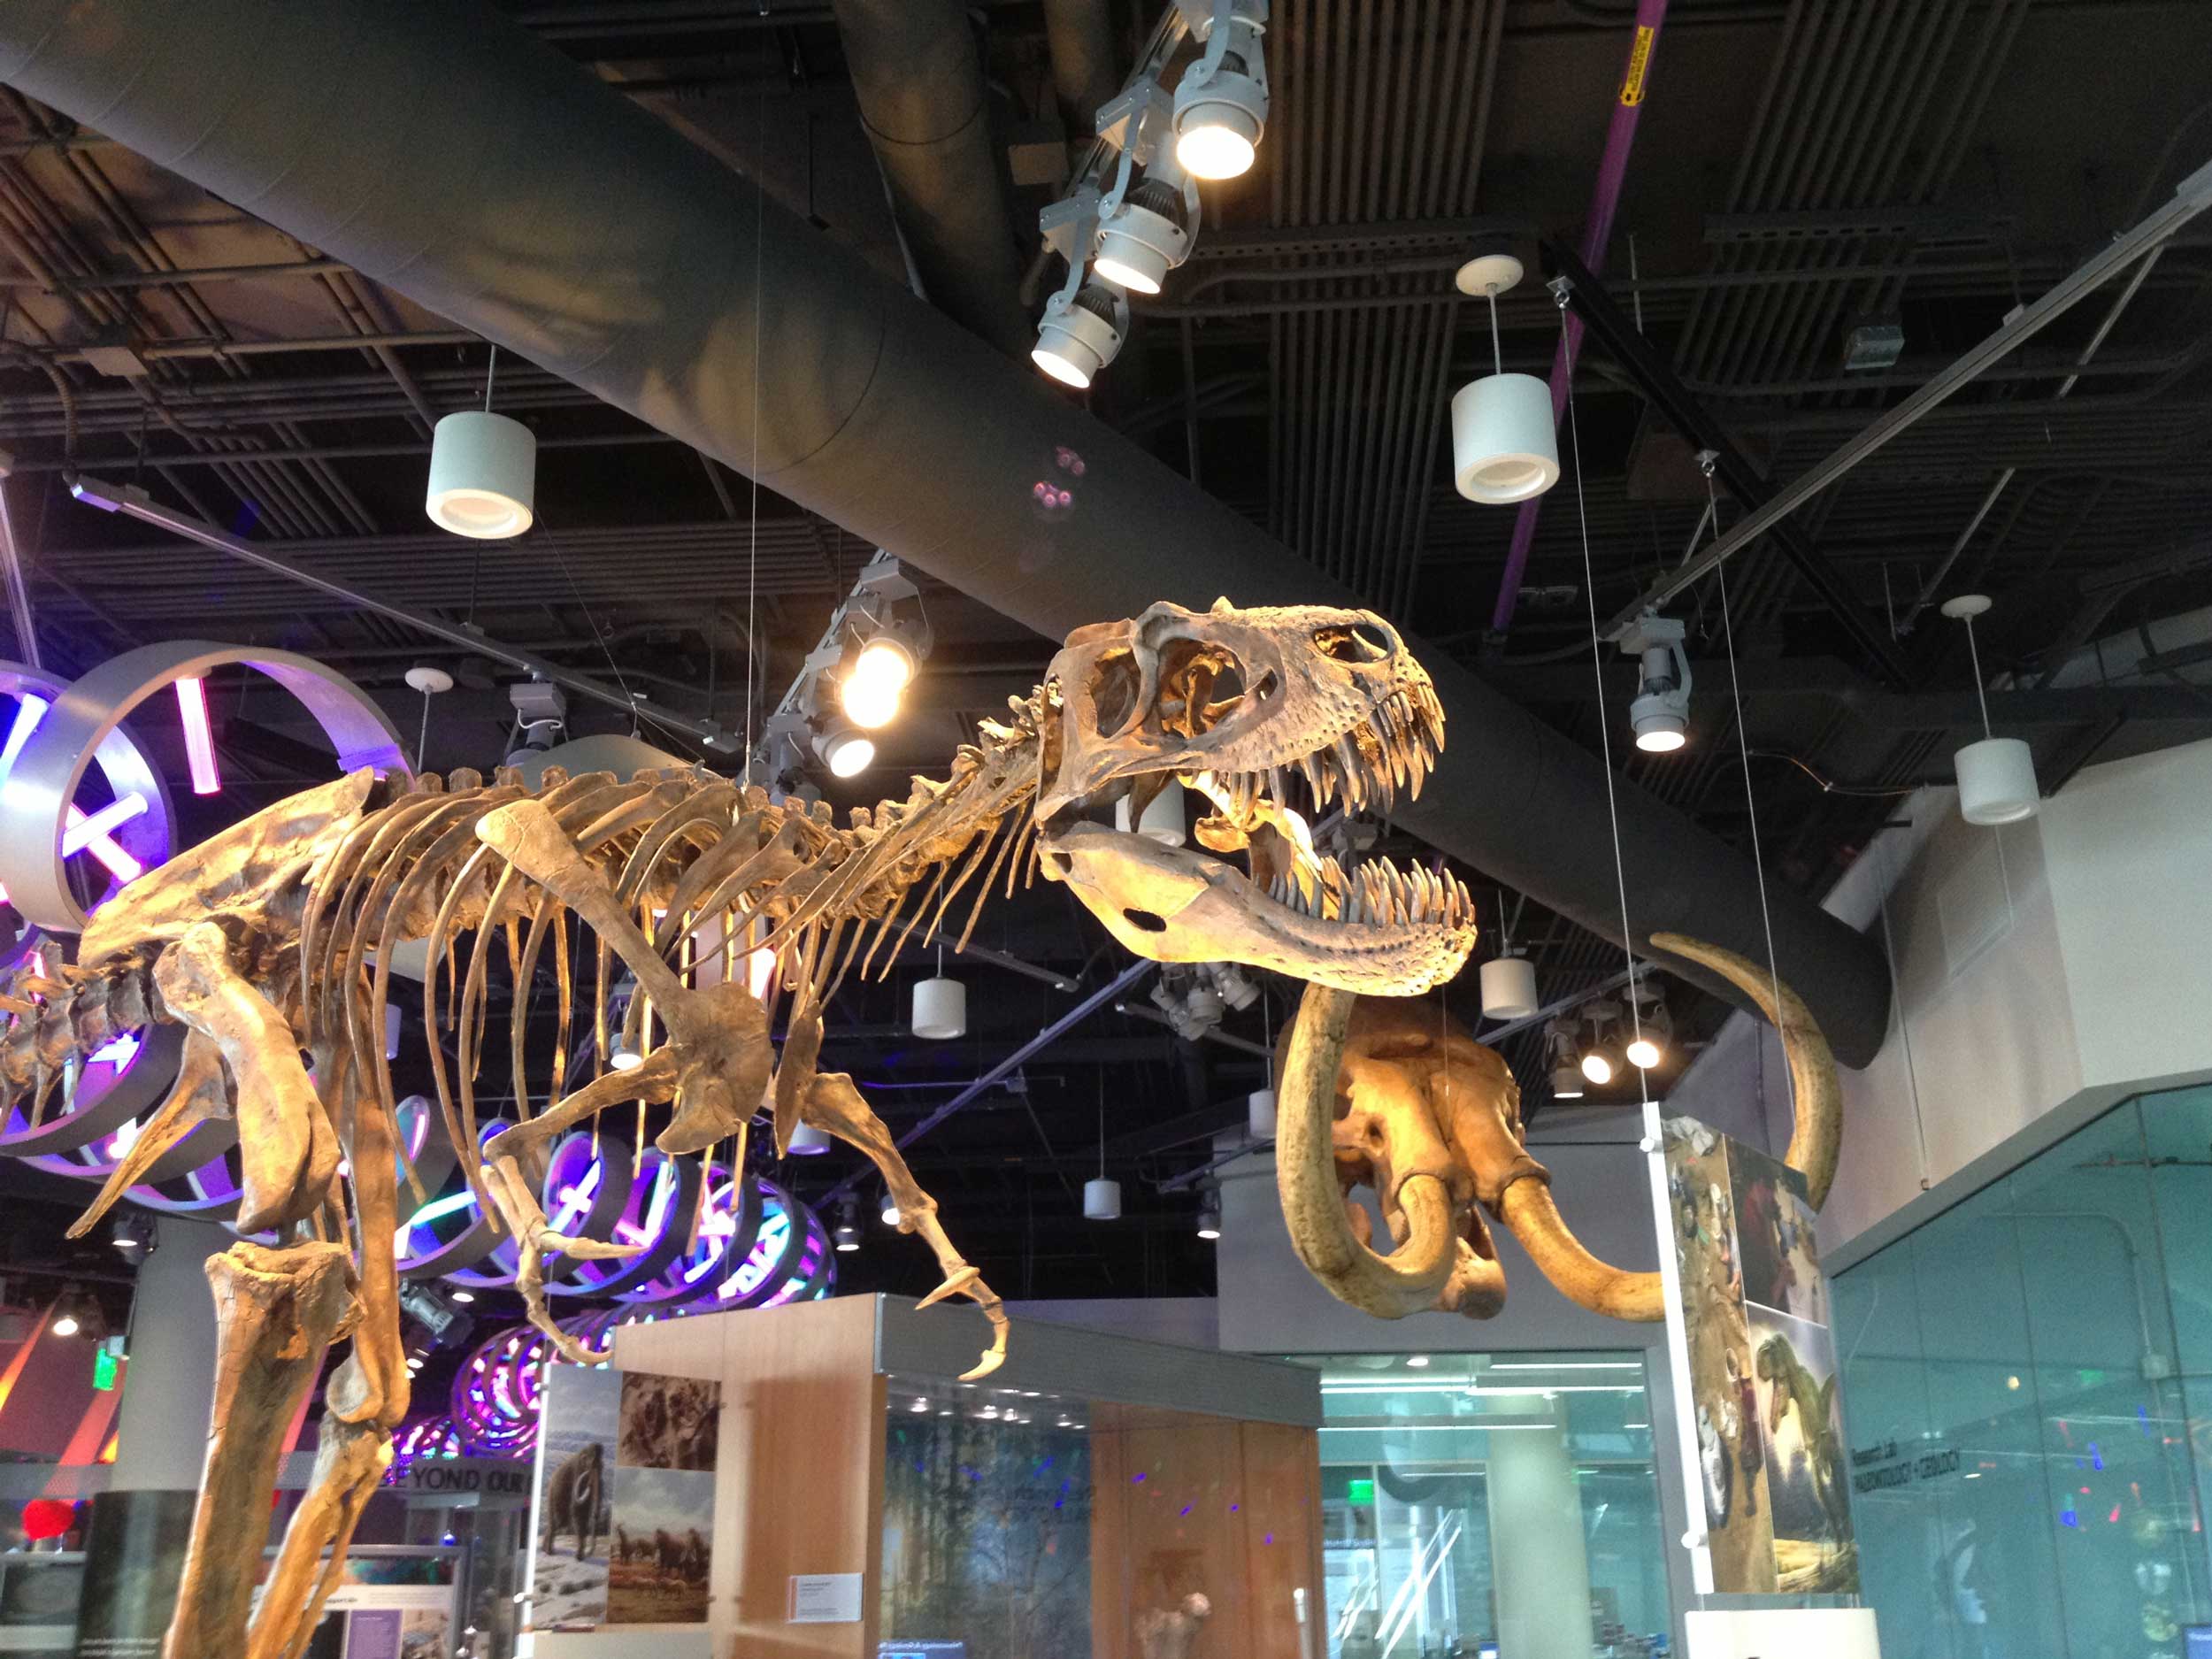 Dinosaur skeletons on display at the Museum of Life + Science